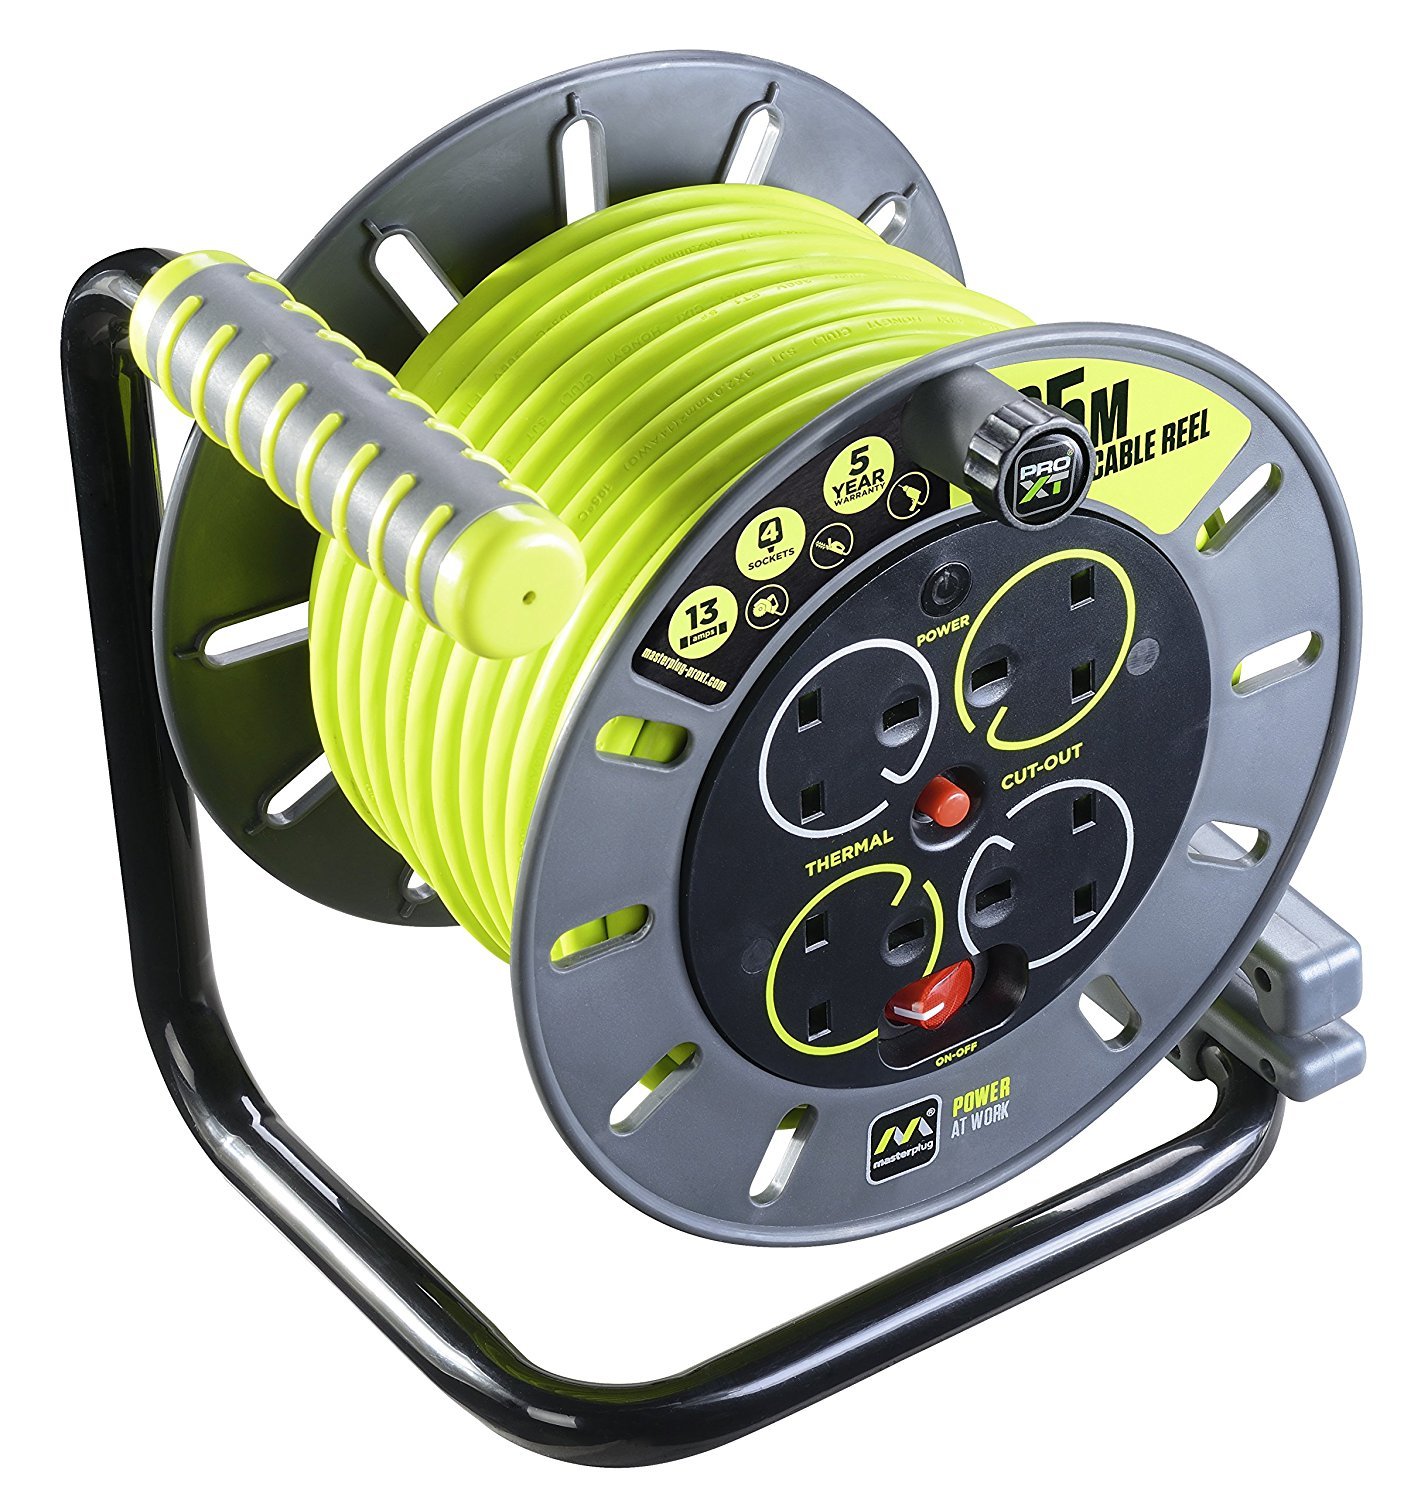 Professional 4 socket x 25 Metres Open Cable Reel – MY Power Tools